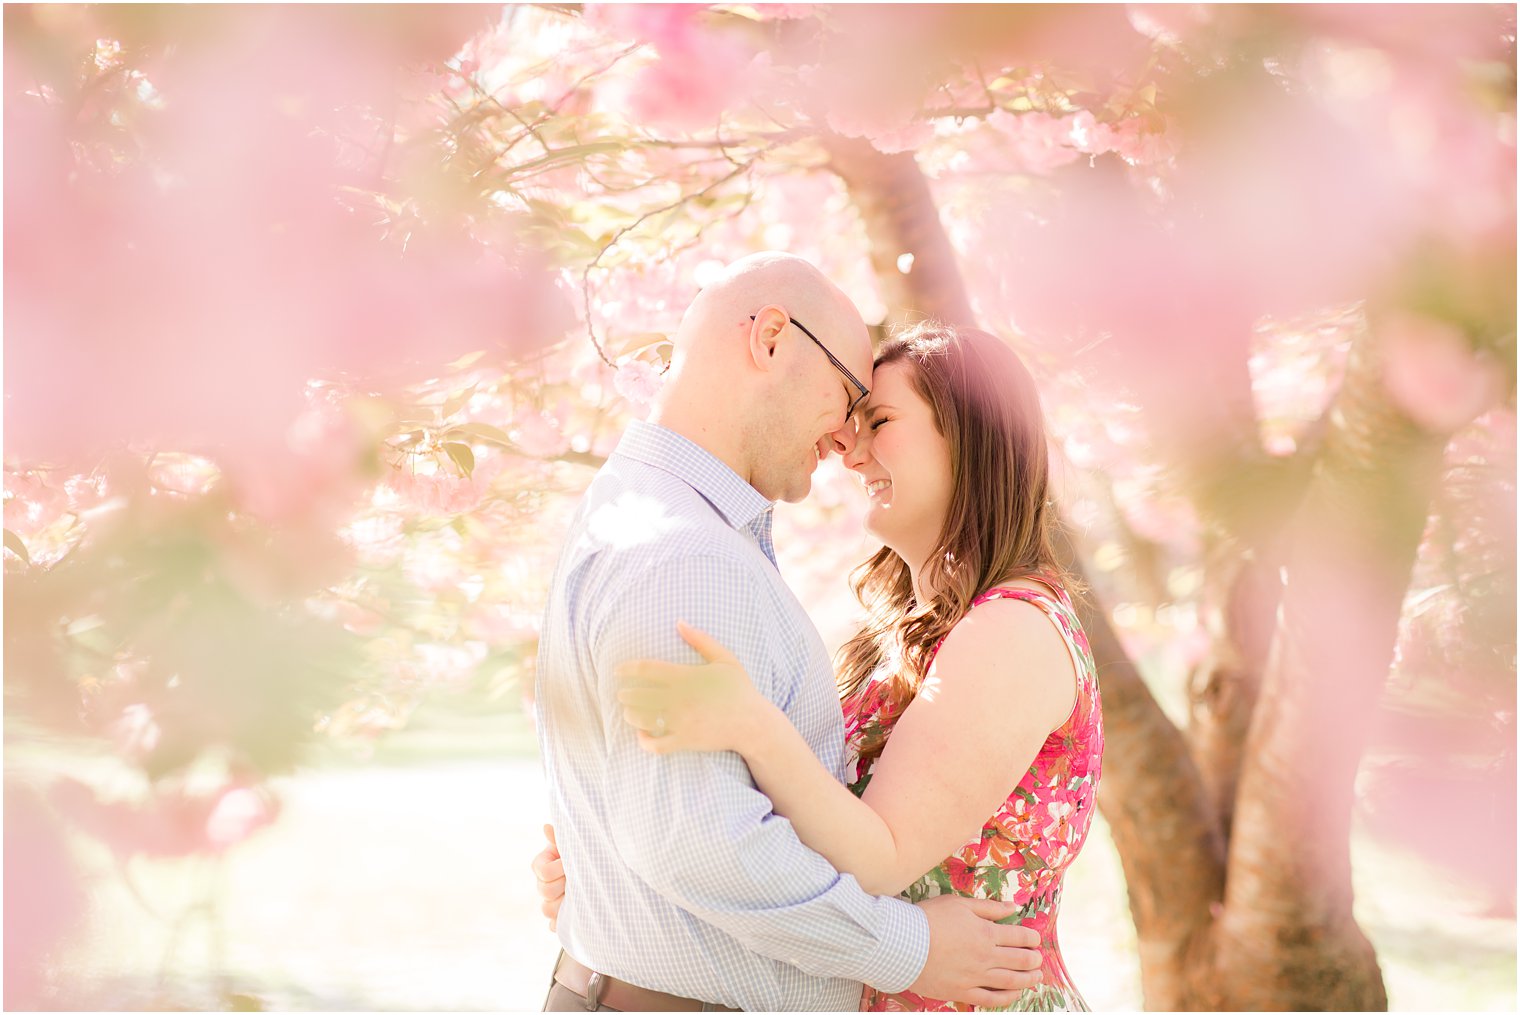 Romantic engagement photo among cherry blossoms at Branch Brook Park